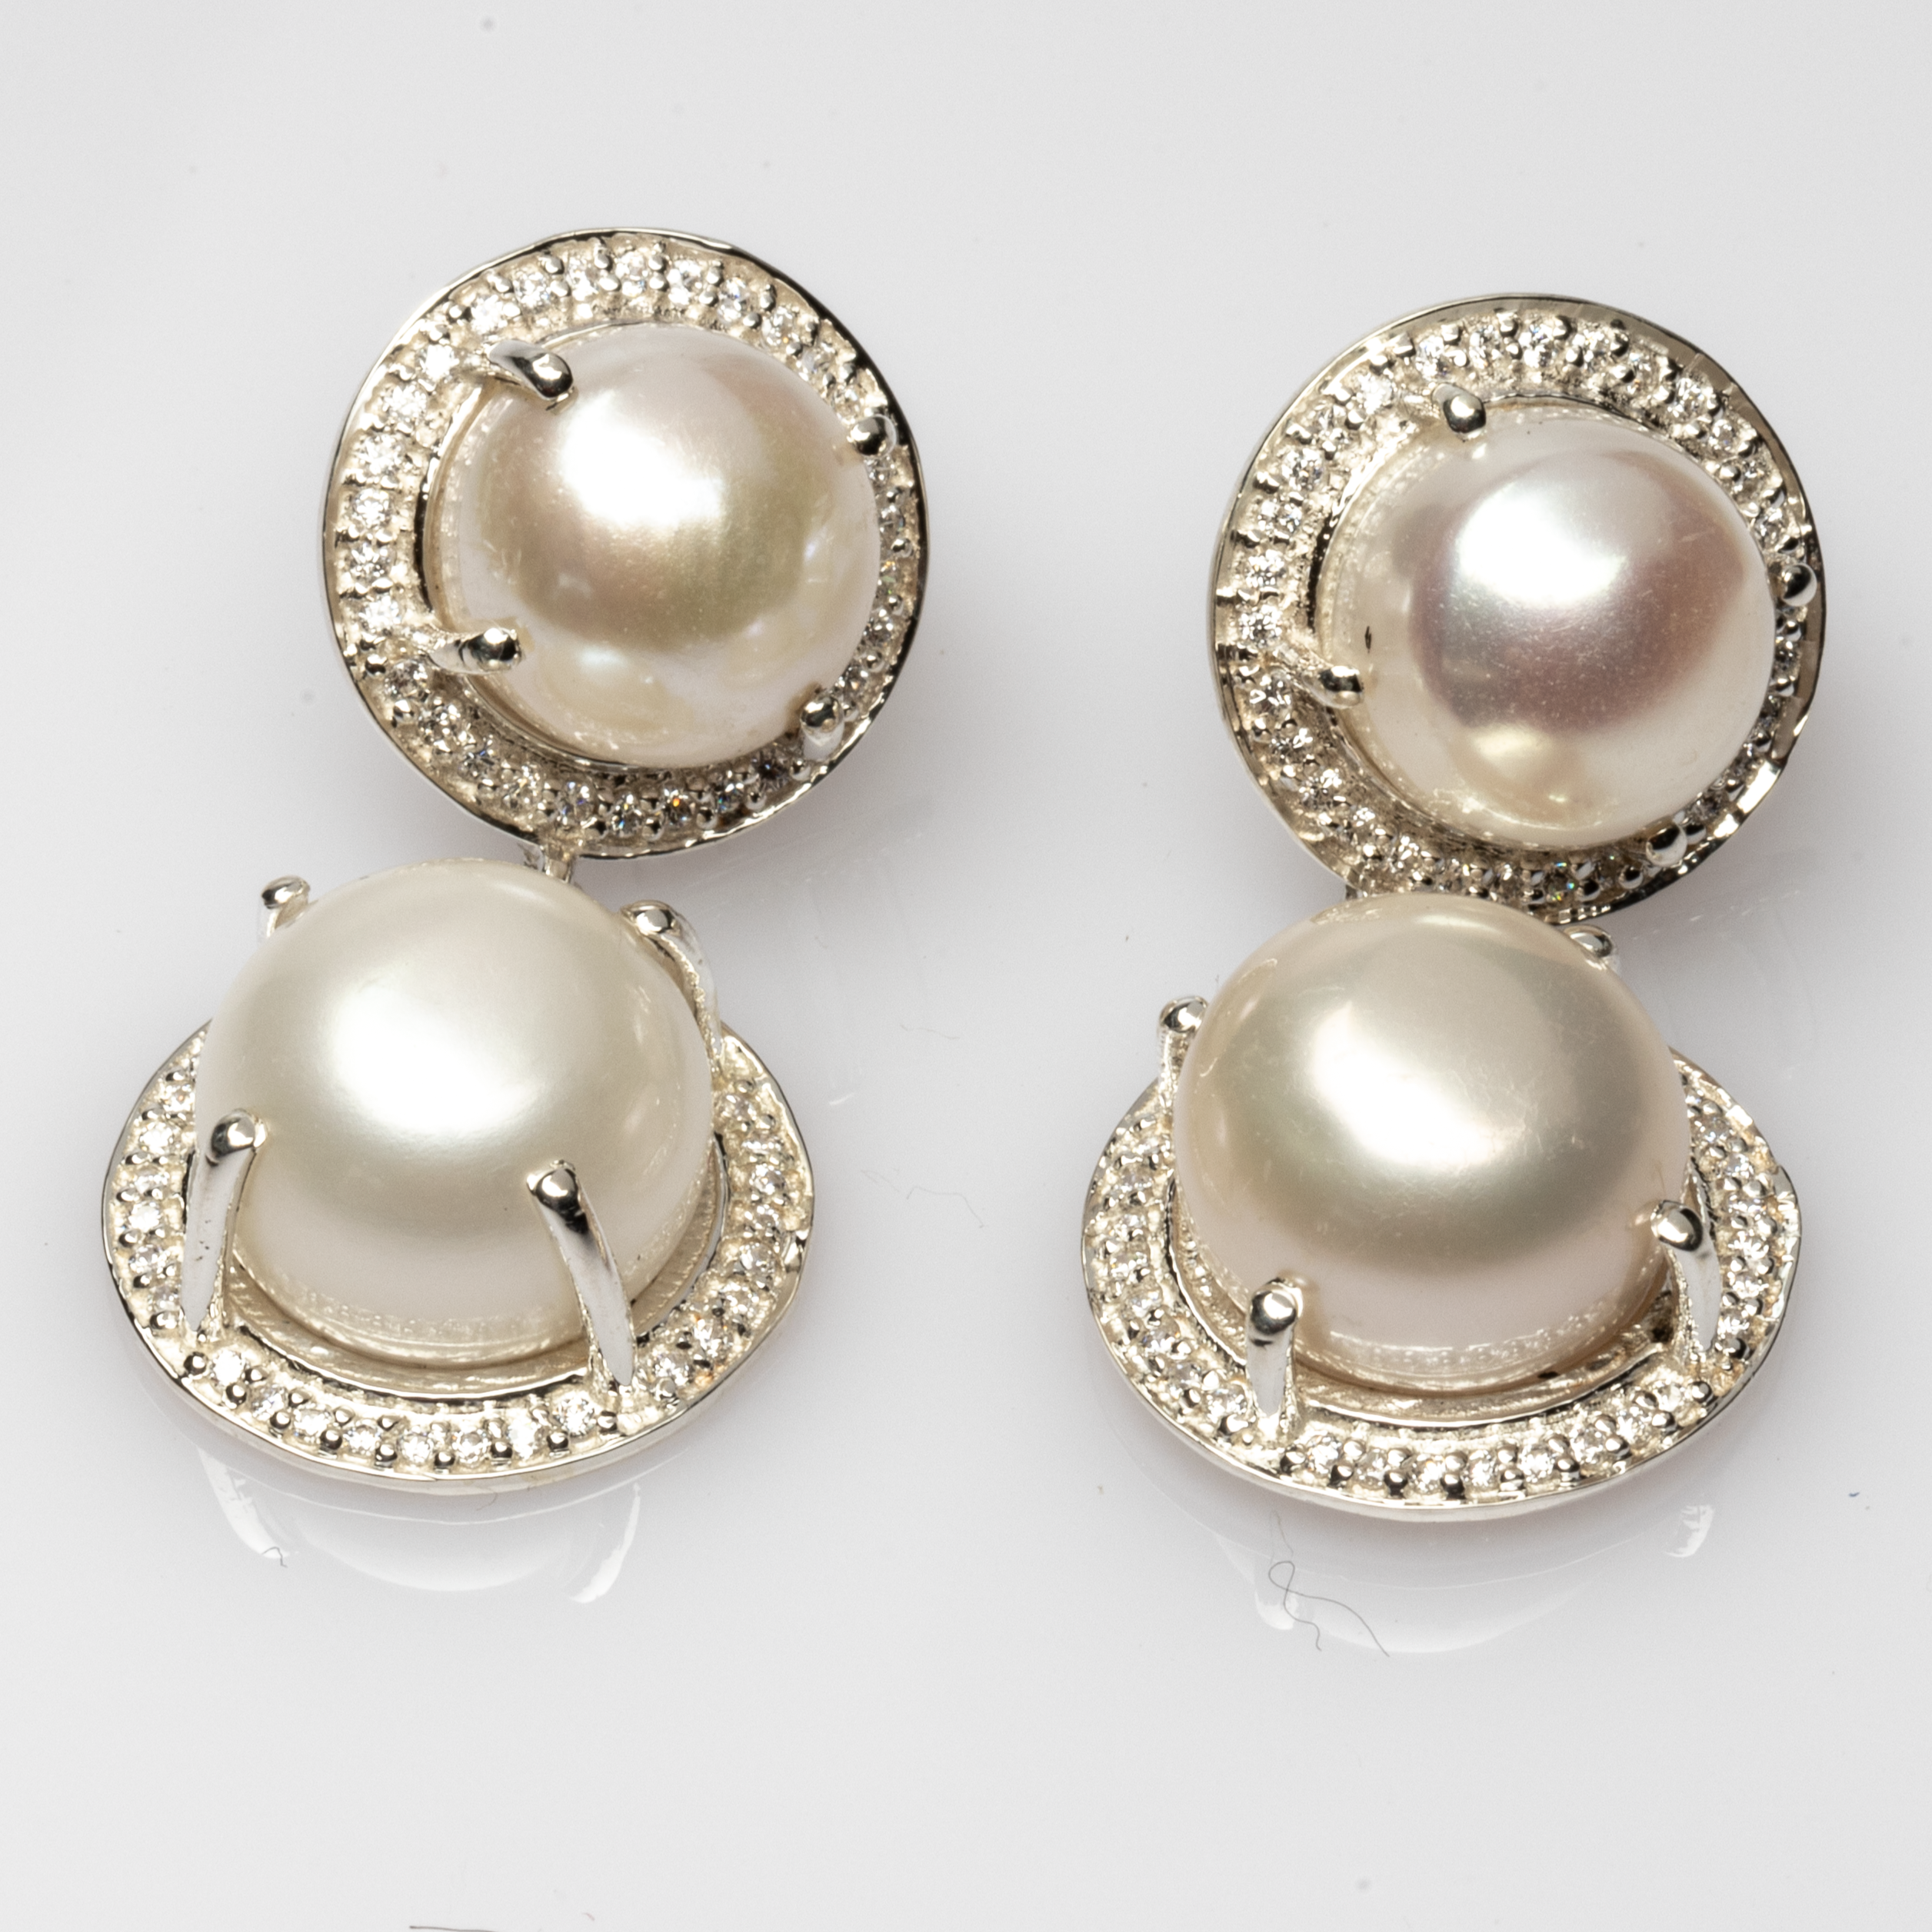 Blisse Allure Sterling Silver Pearl and CZ Earrings